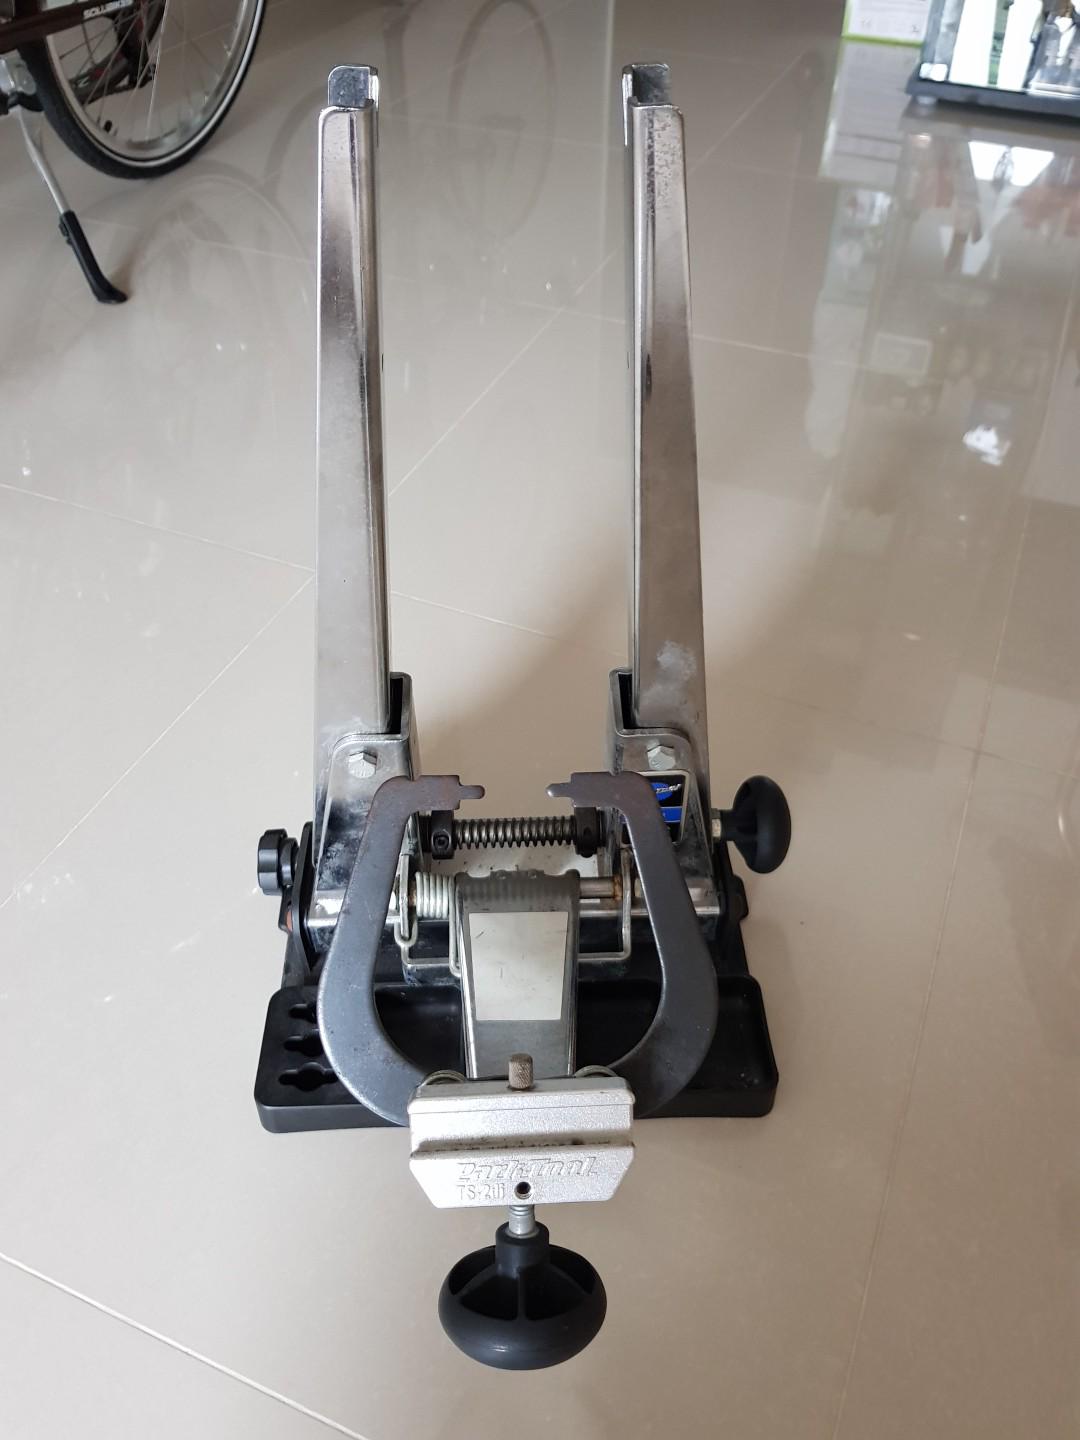 used truing stand